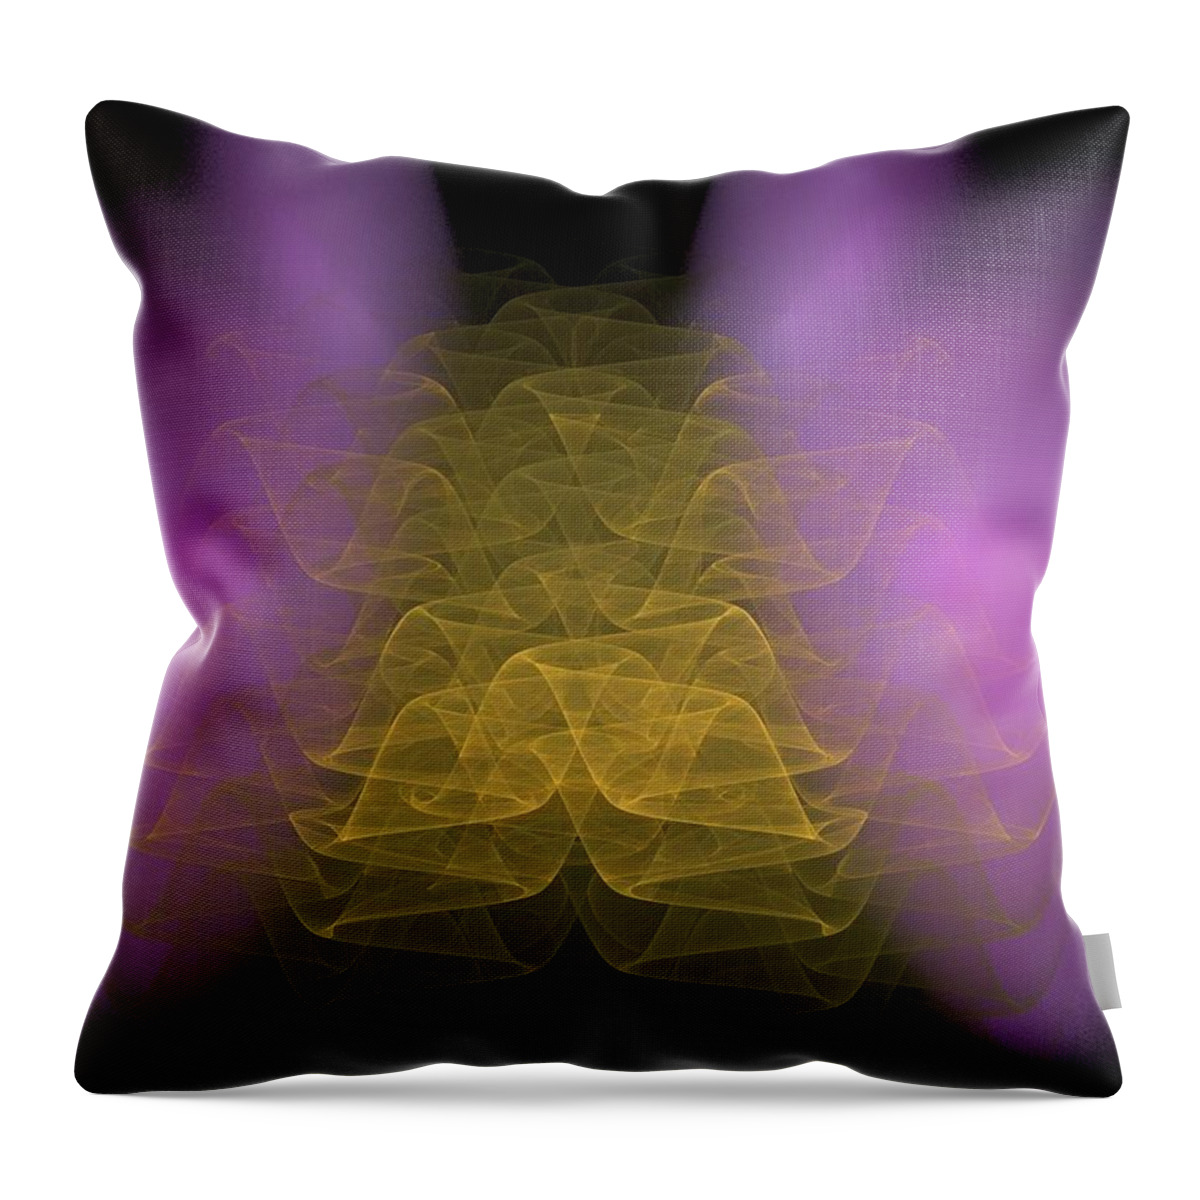 Pink Throw Pillow featuring the painting Sound Waves by Bruce Nutting